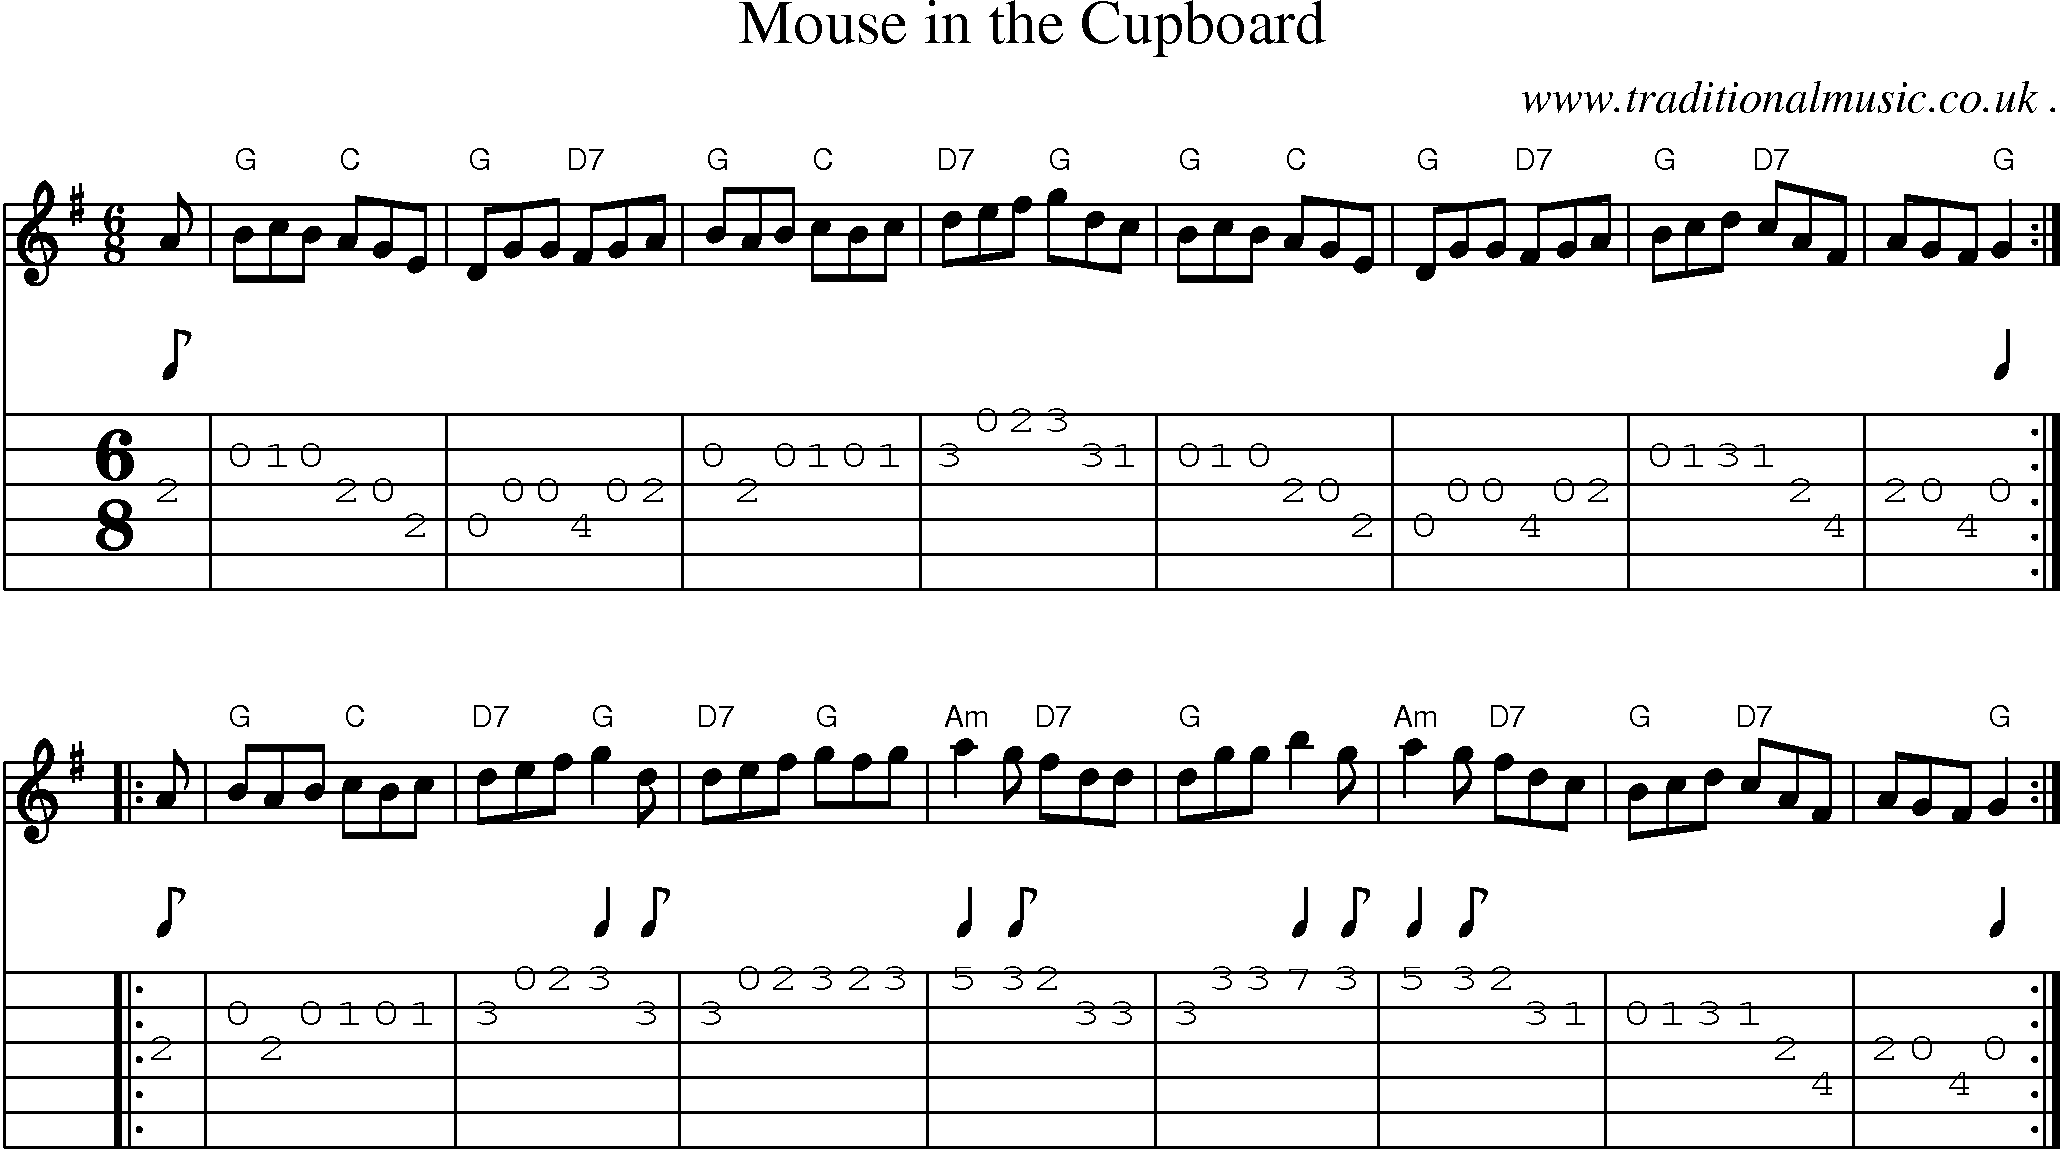 Sheet-music  score, Chords and Guitar Tabs for Mouse In The Cupboard